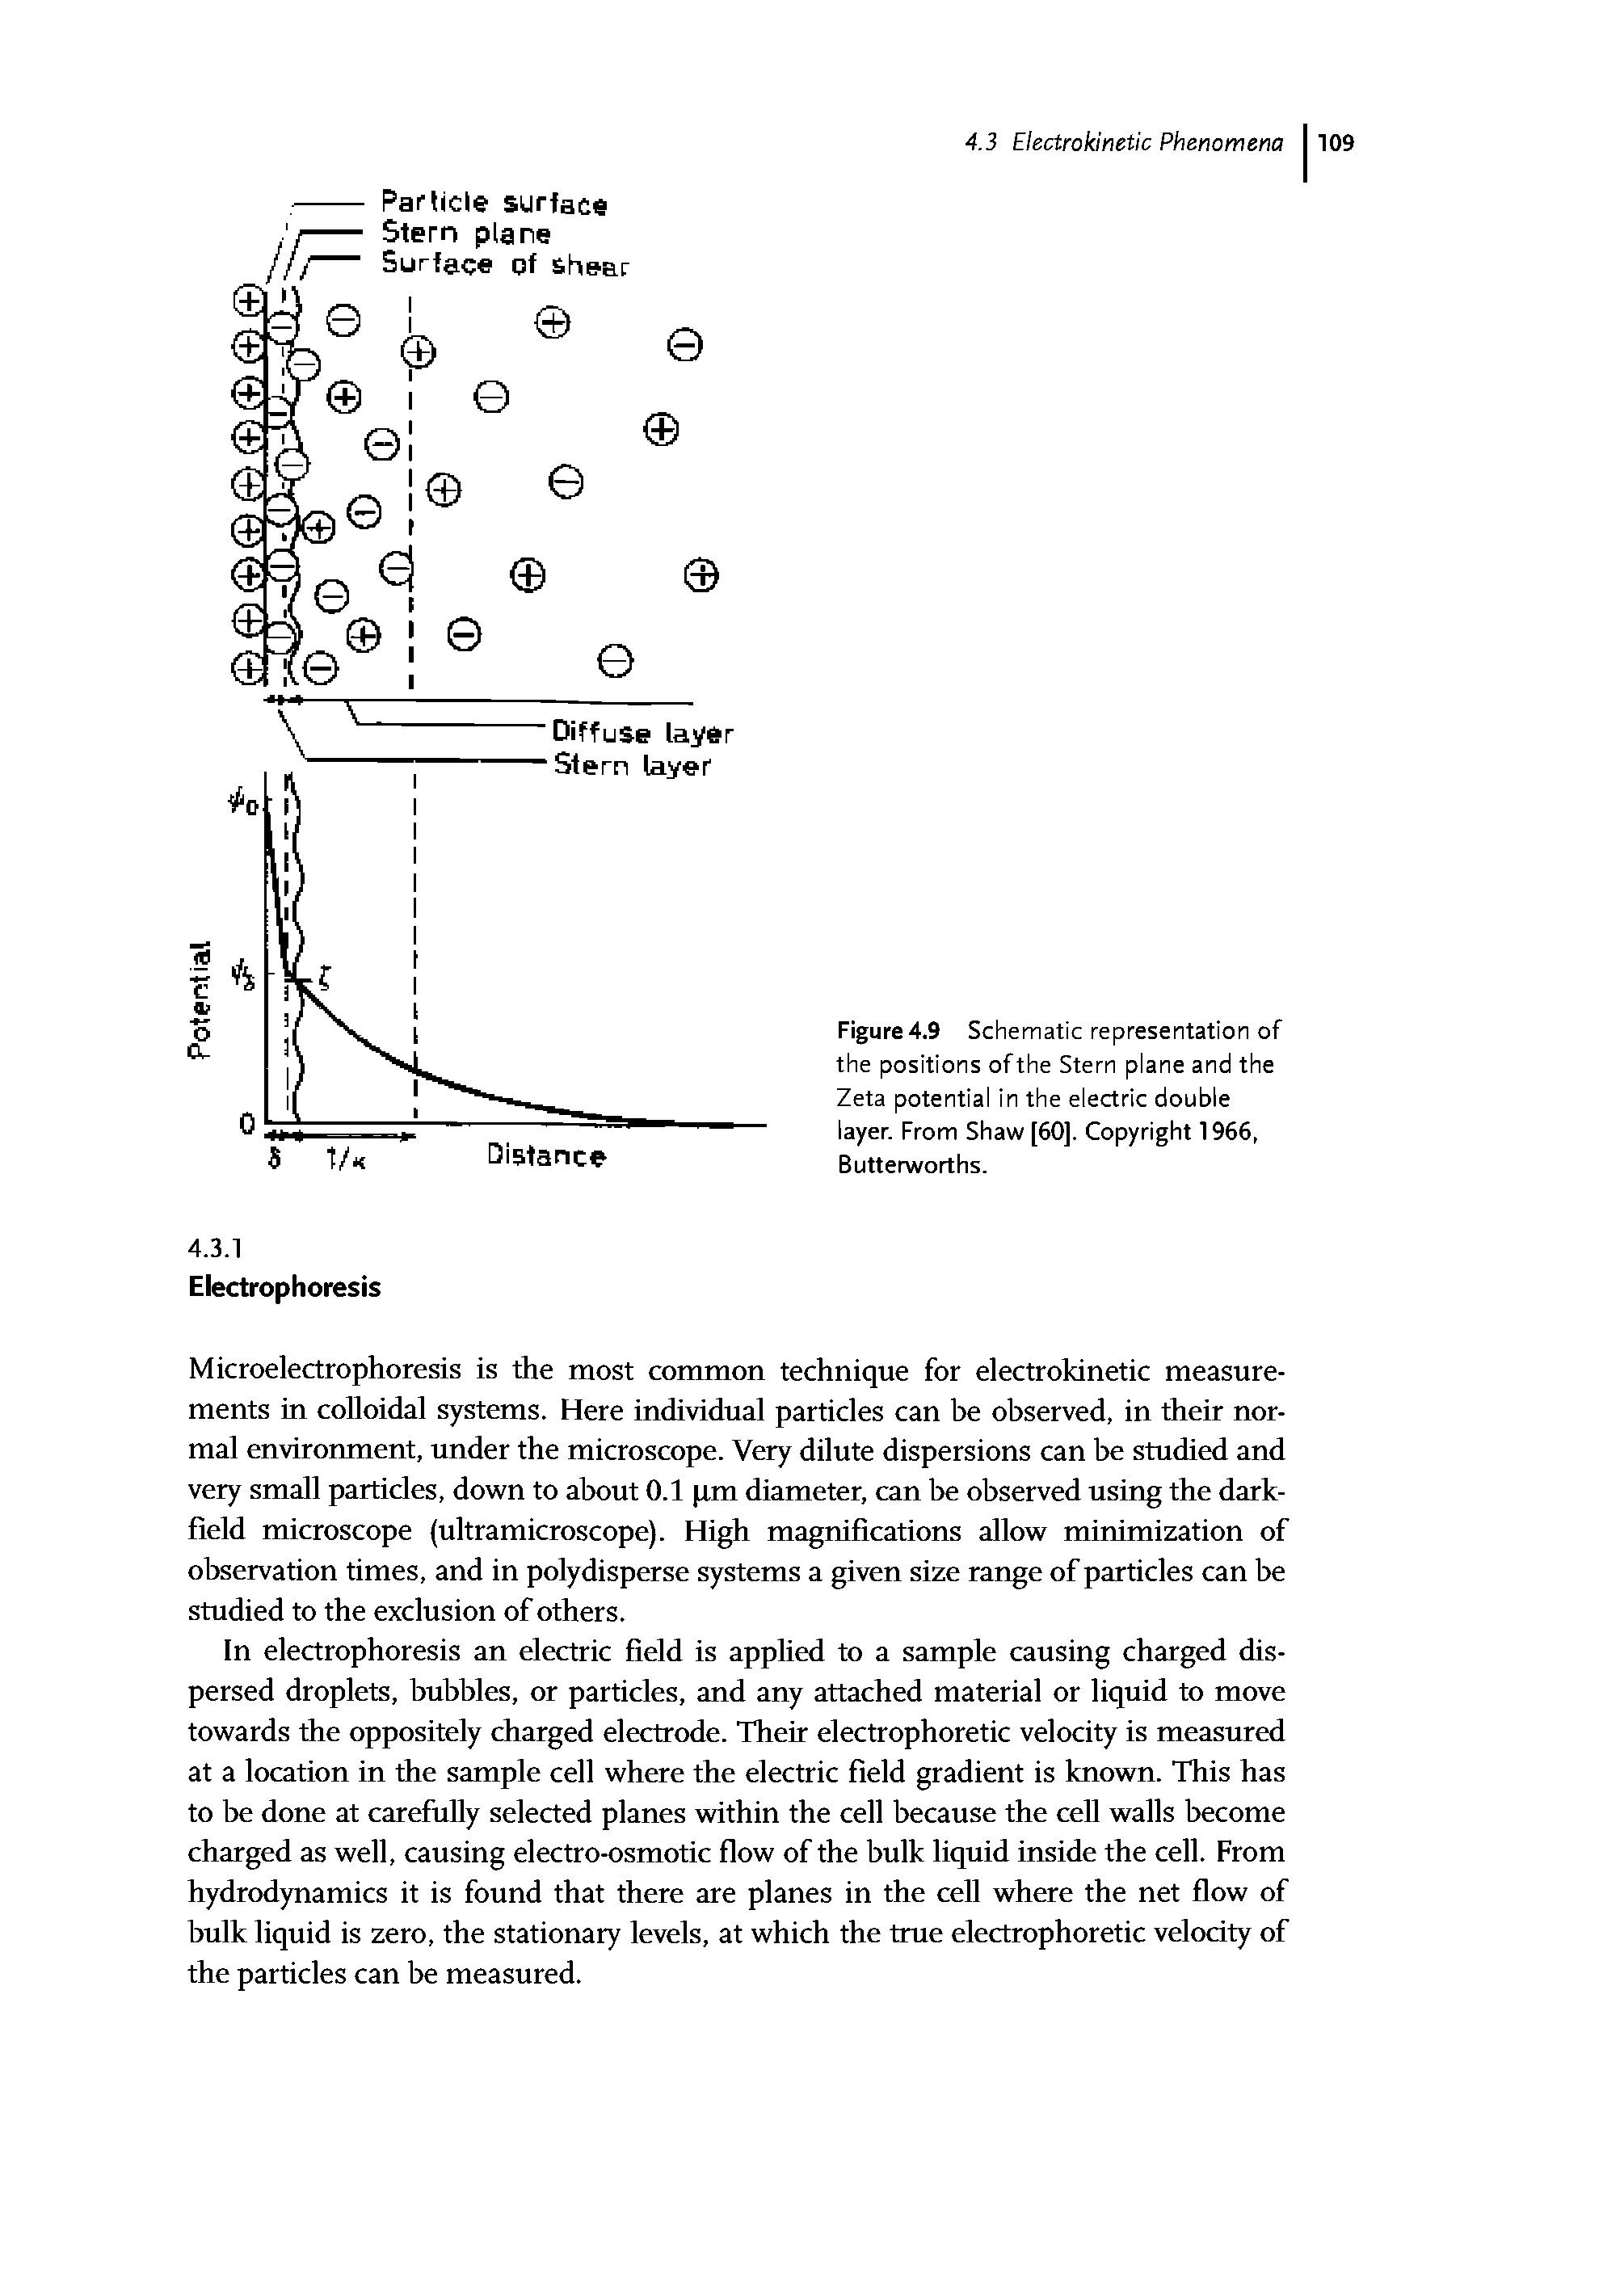 Figure 4.9 Schematic representation of the positions of the Stern plane and the Zeta potential in the electric double layer. From Shaw [60]. Copyright 1966, Butterworths.